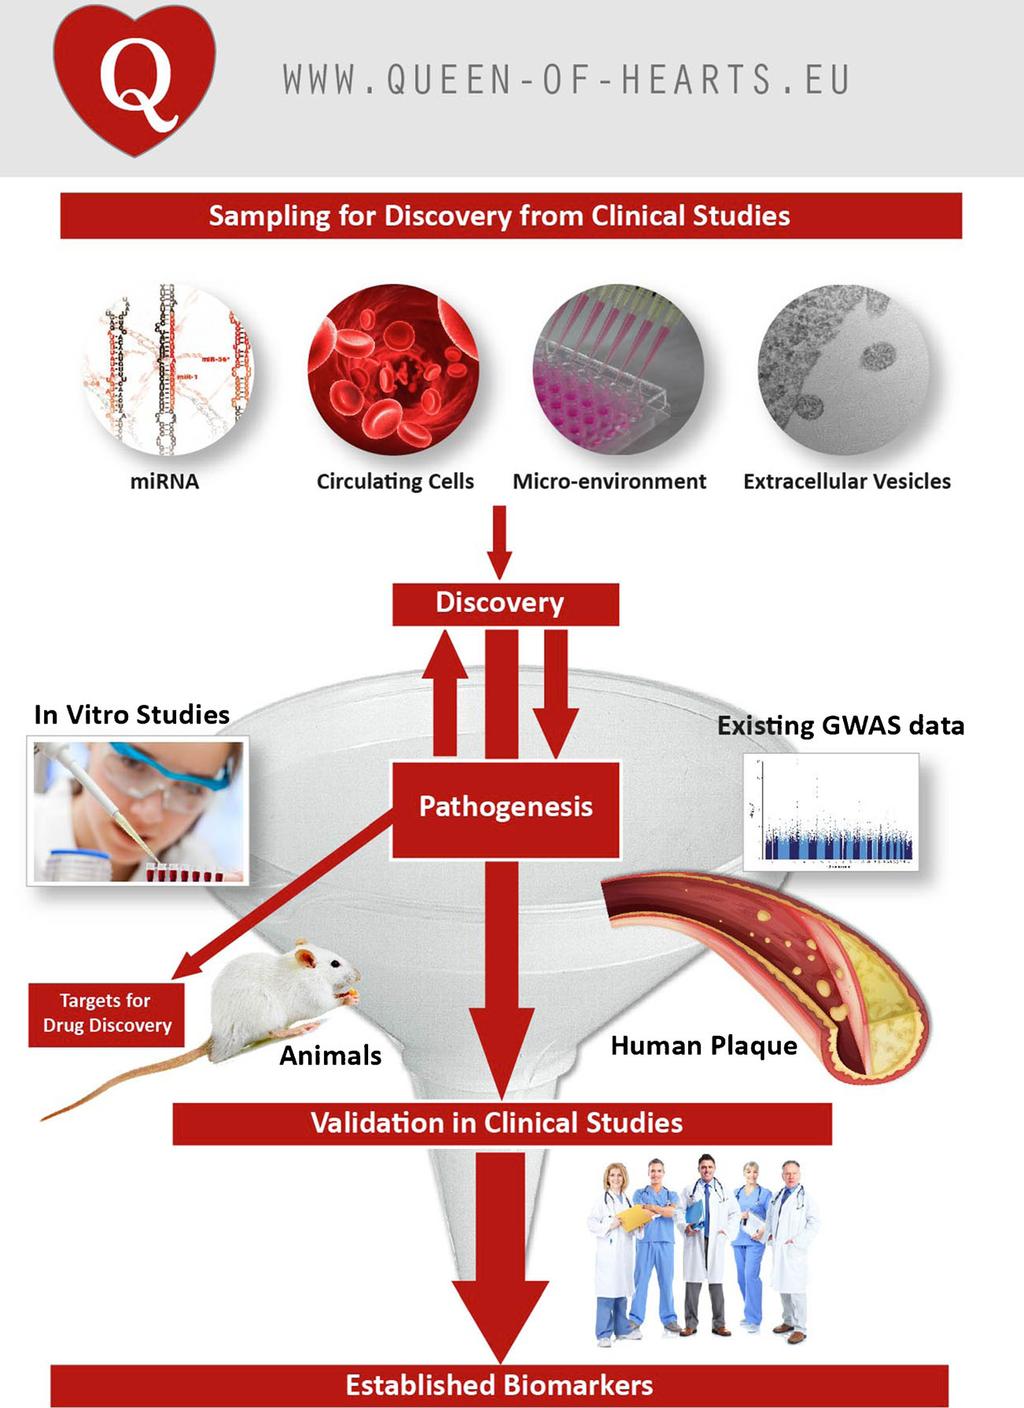 92 Neth Heart J (2015) 23:89 93 Fig. 1 The Queen of Hearts consortium consists of three themes that are interconnected: Discovery of biomarkers, Pathogenesis and Validation in clinical studies.